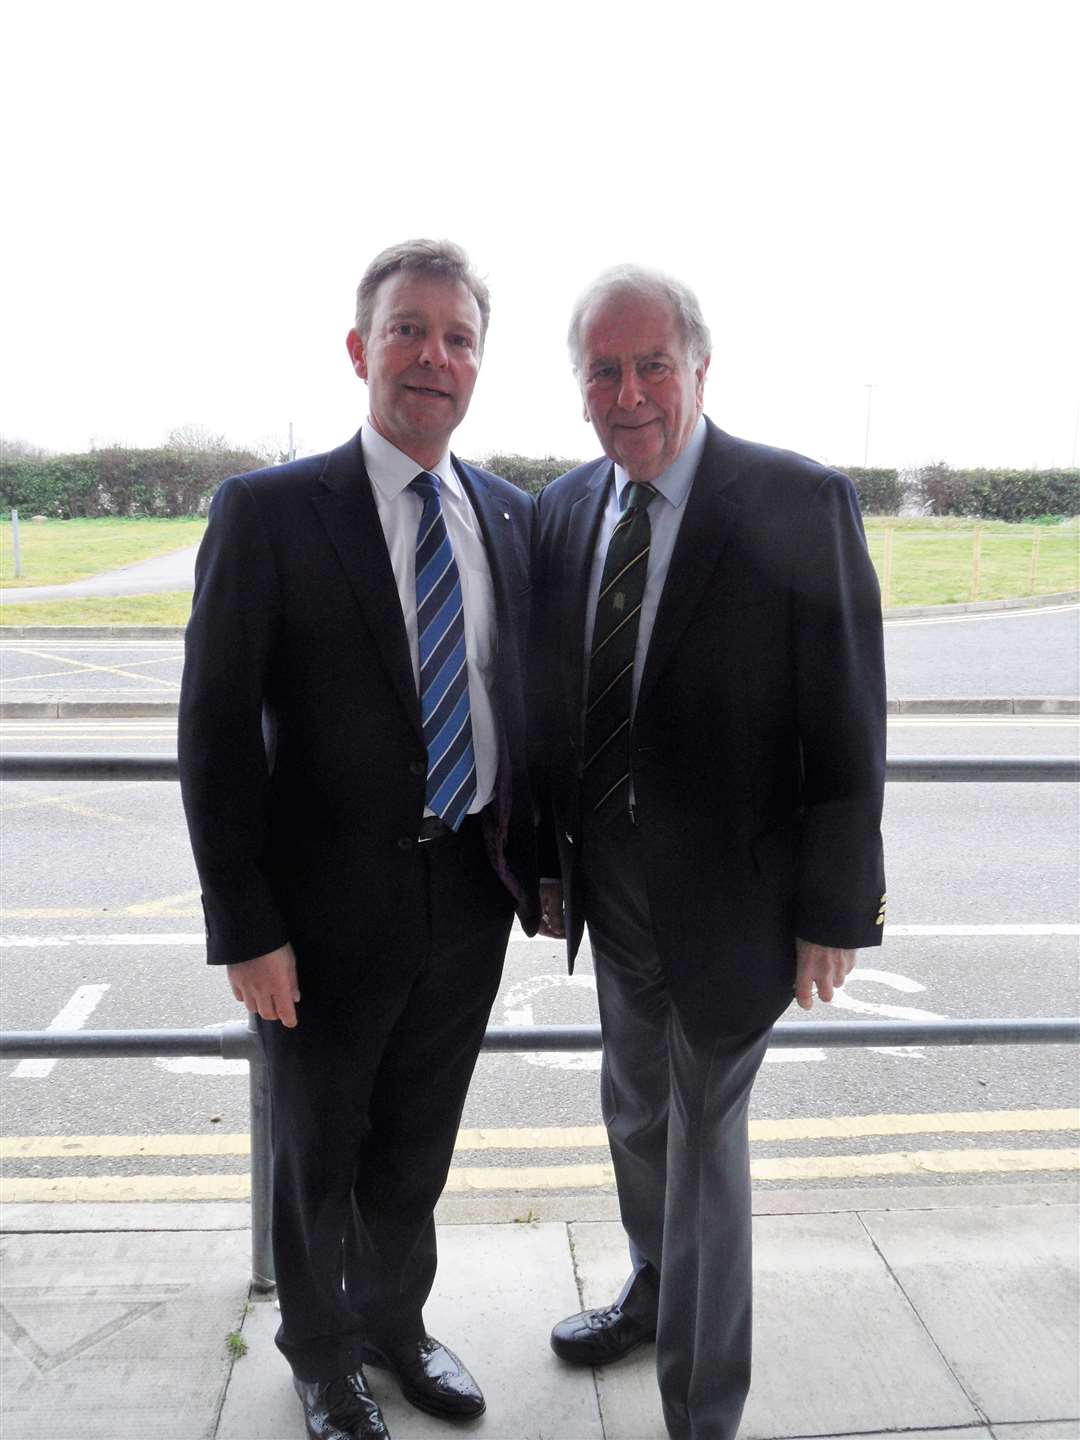 Thanet MPs Craig Mackinlay and Sir Roger Gale